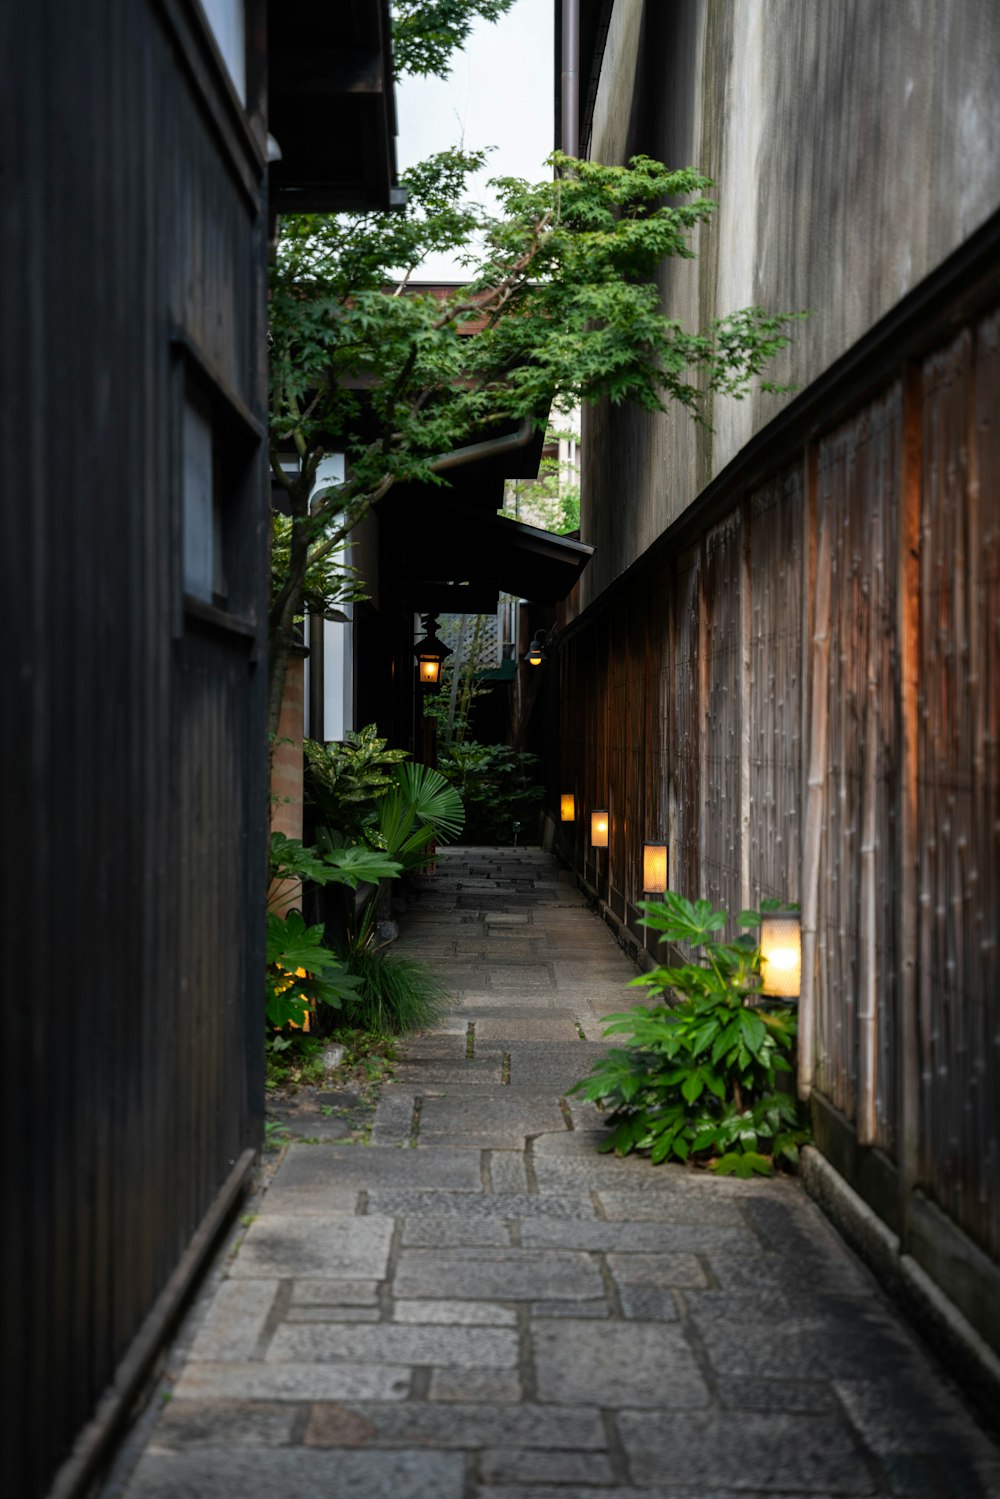 a narrow alley way with a wooden building in the background